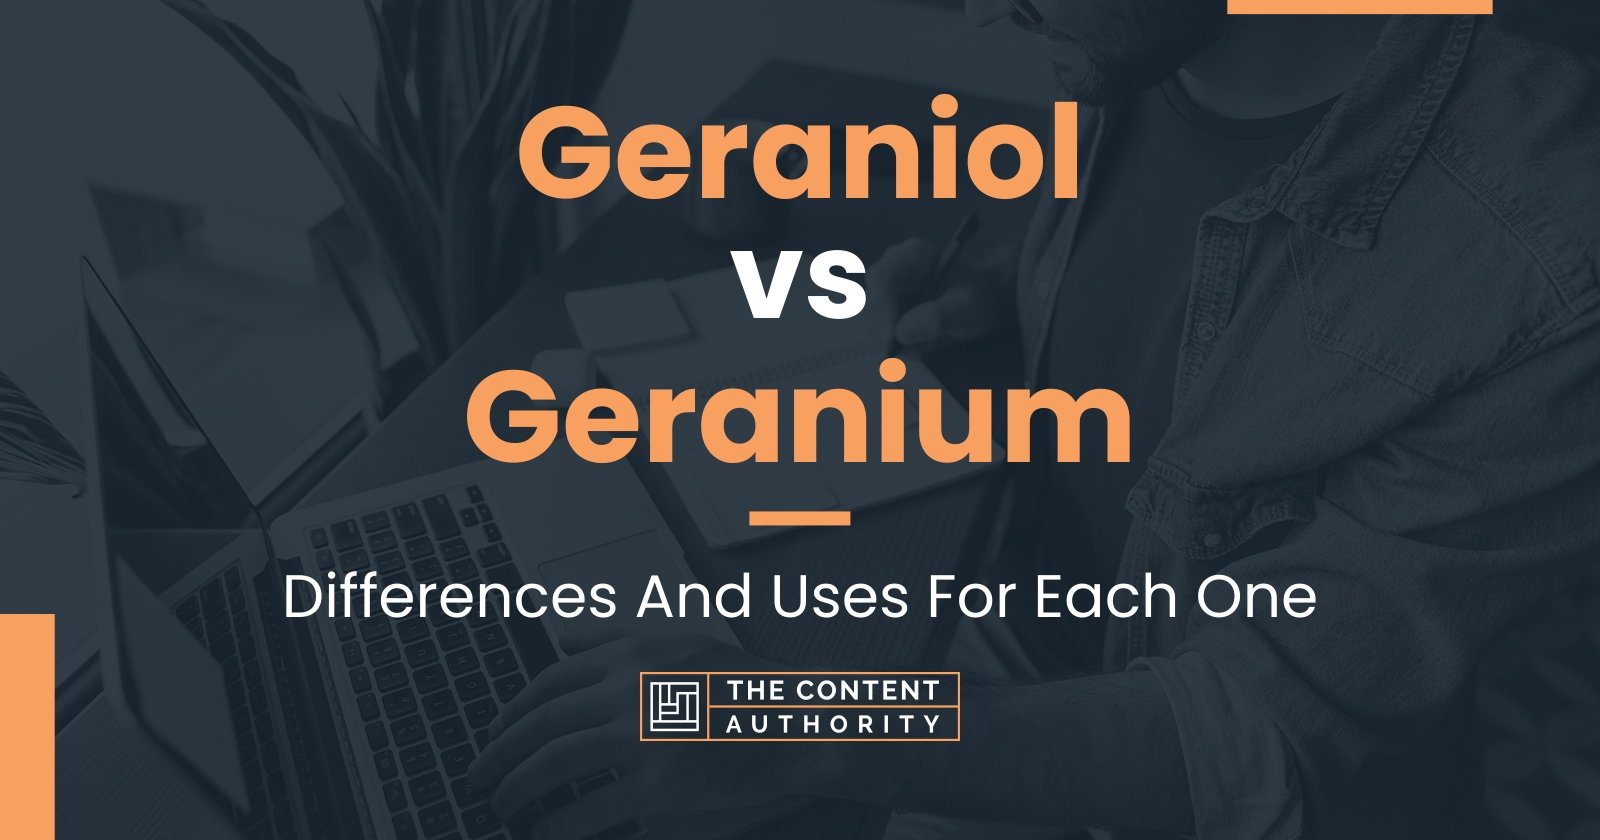 Geraniol vs Geranium: Differences And Uses For Each One